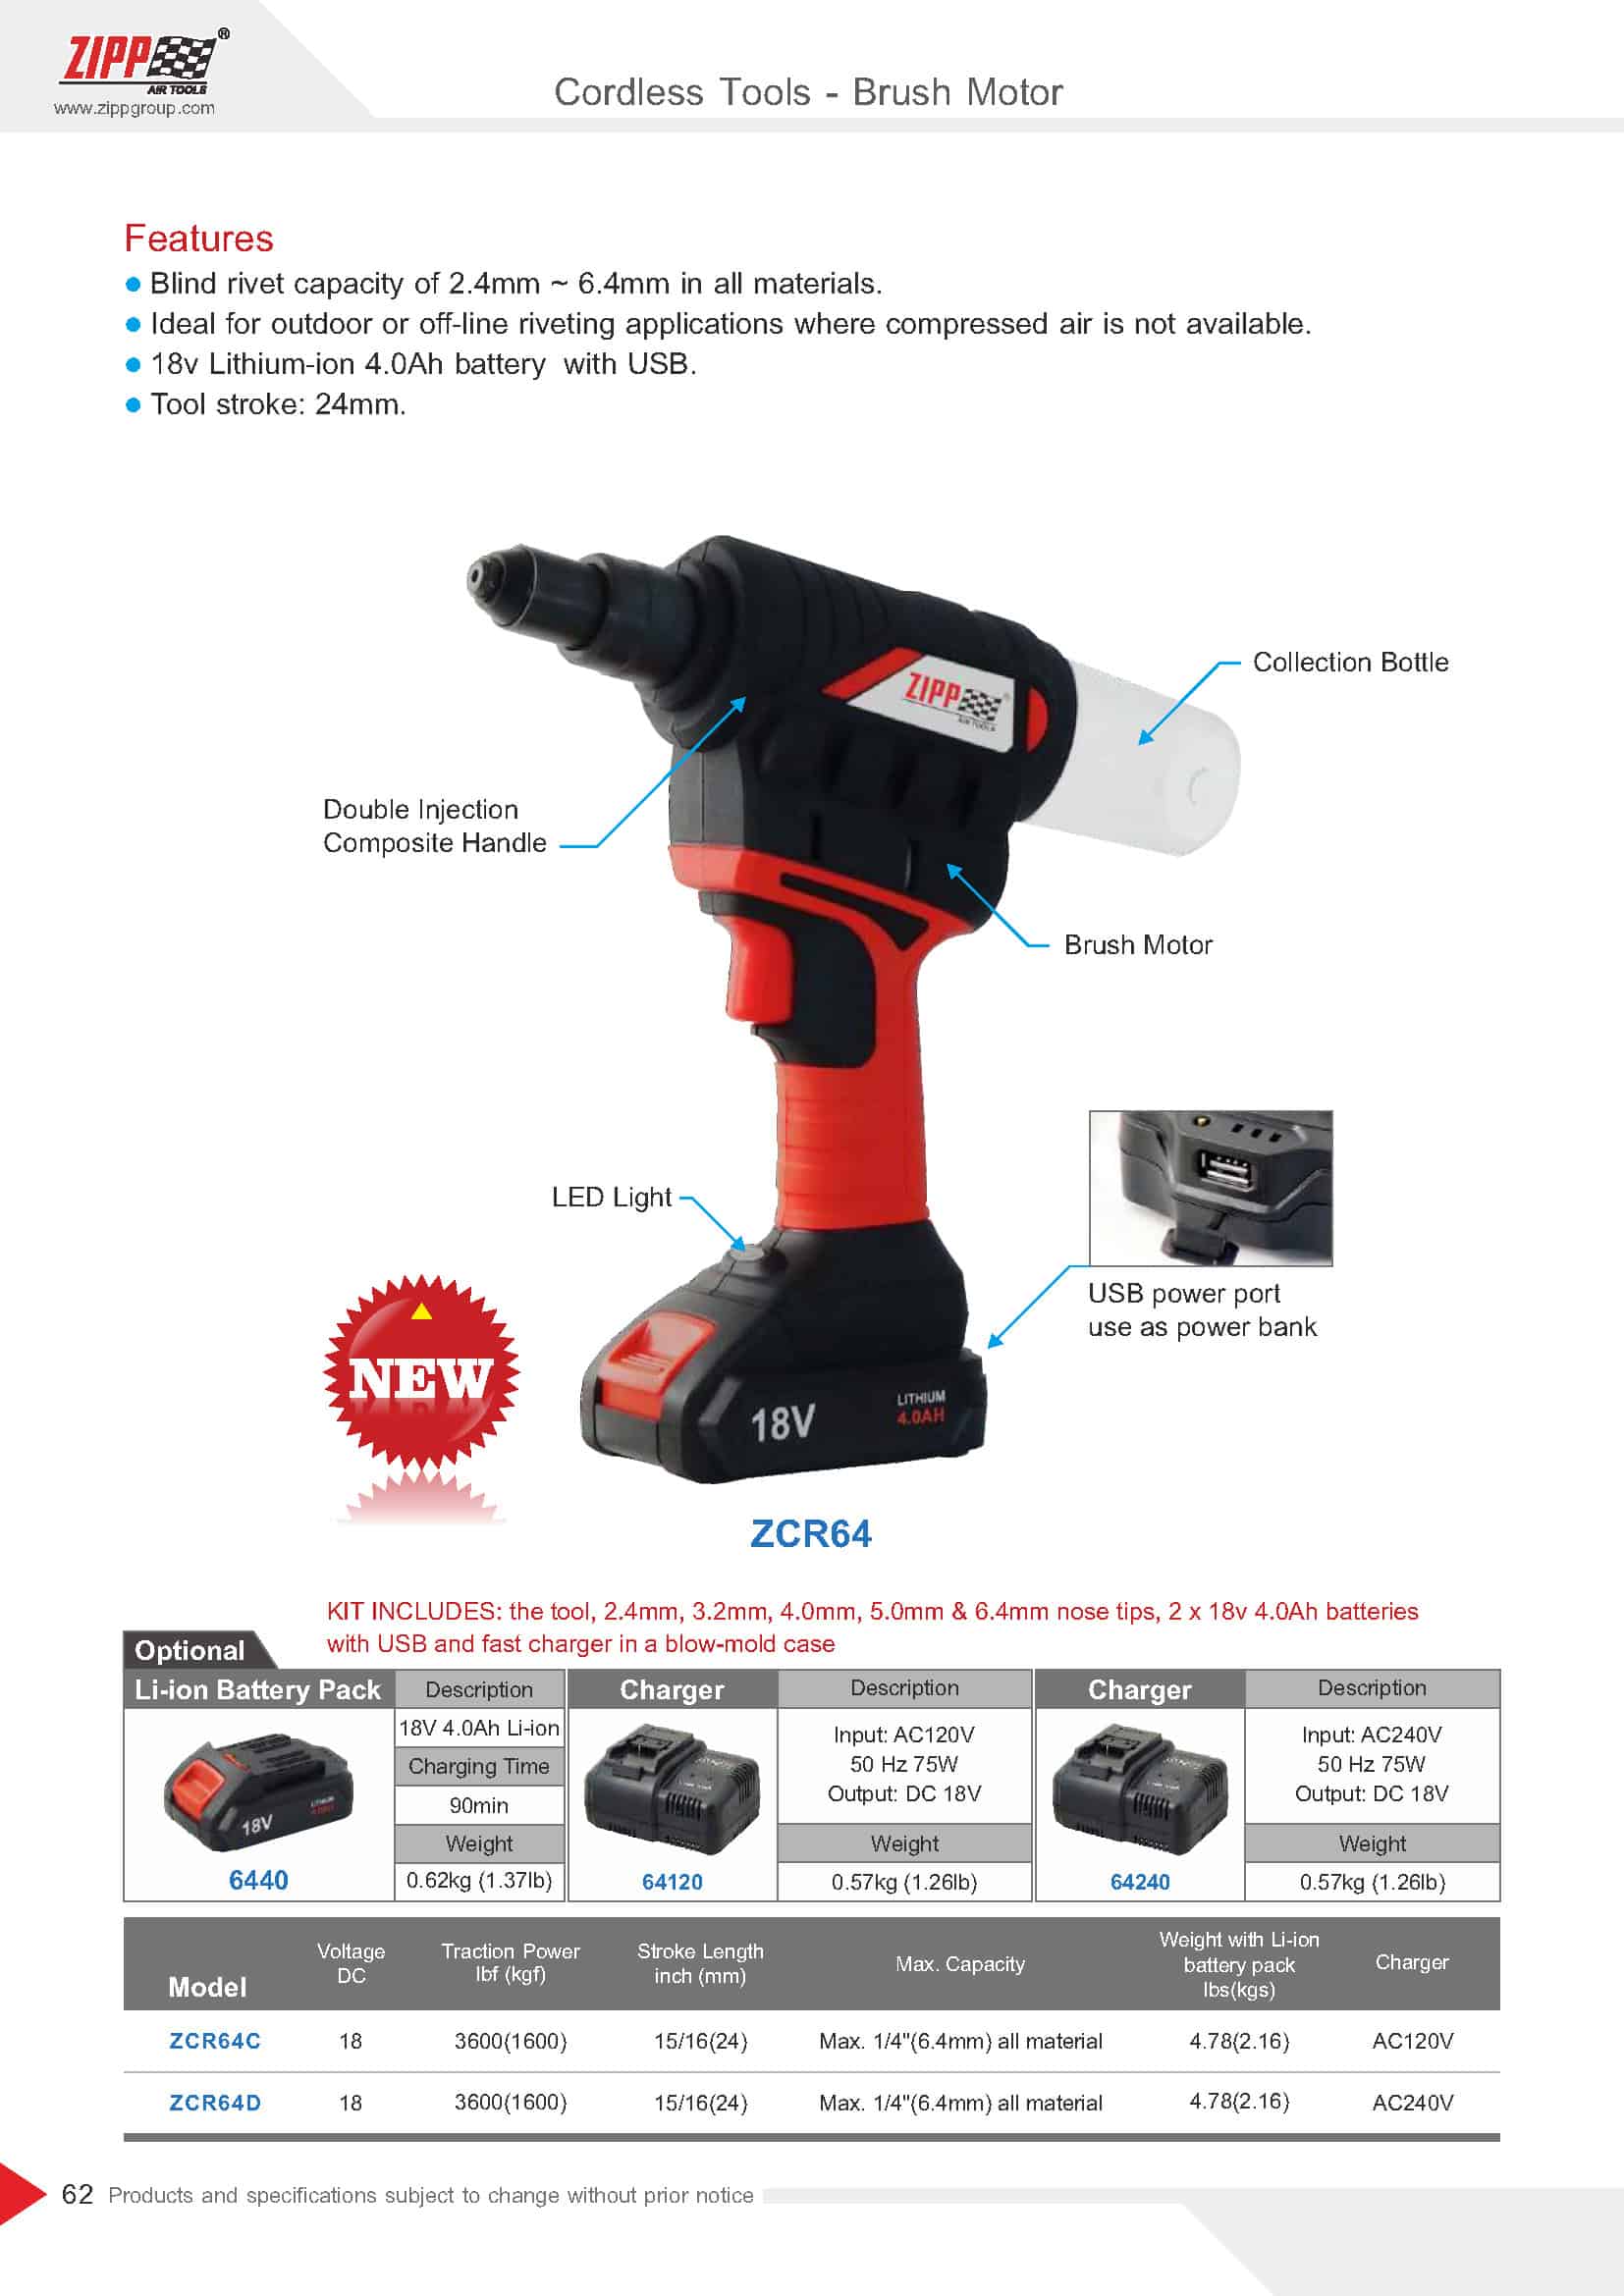 new powerful cordless blind riveter available now